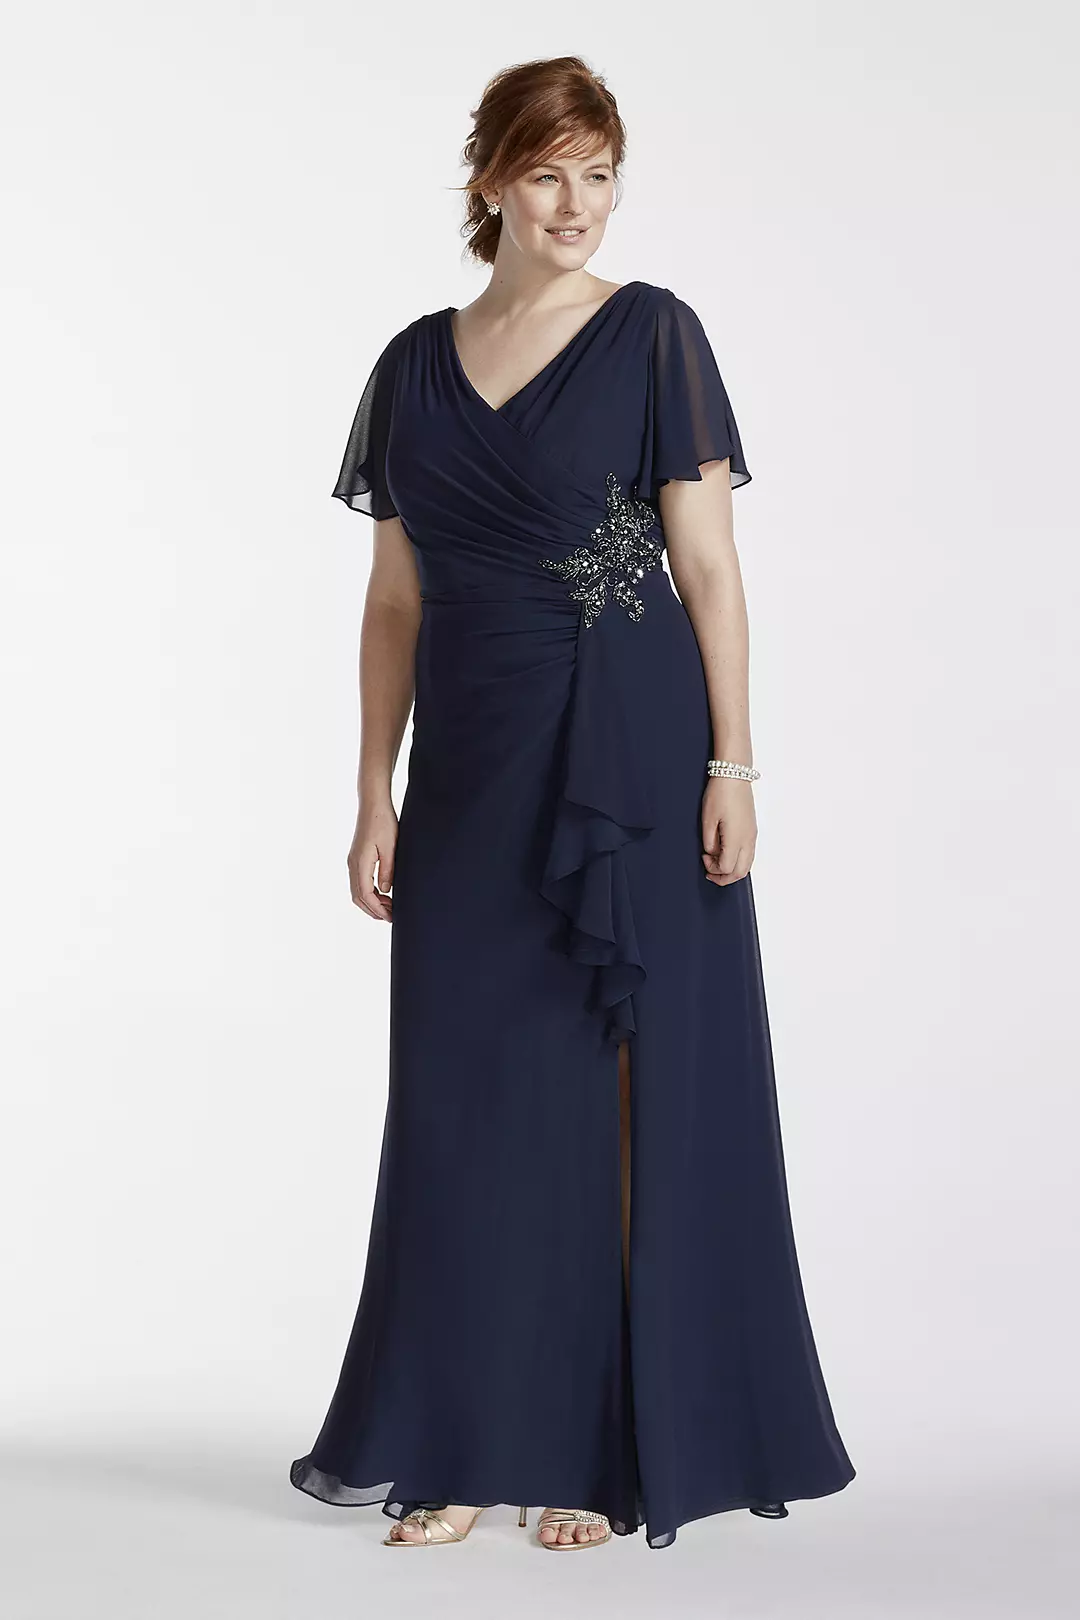 Long Chiffon Plus Size Dress with Flutter Sleeves Image 1